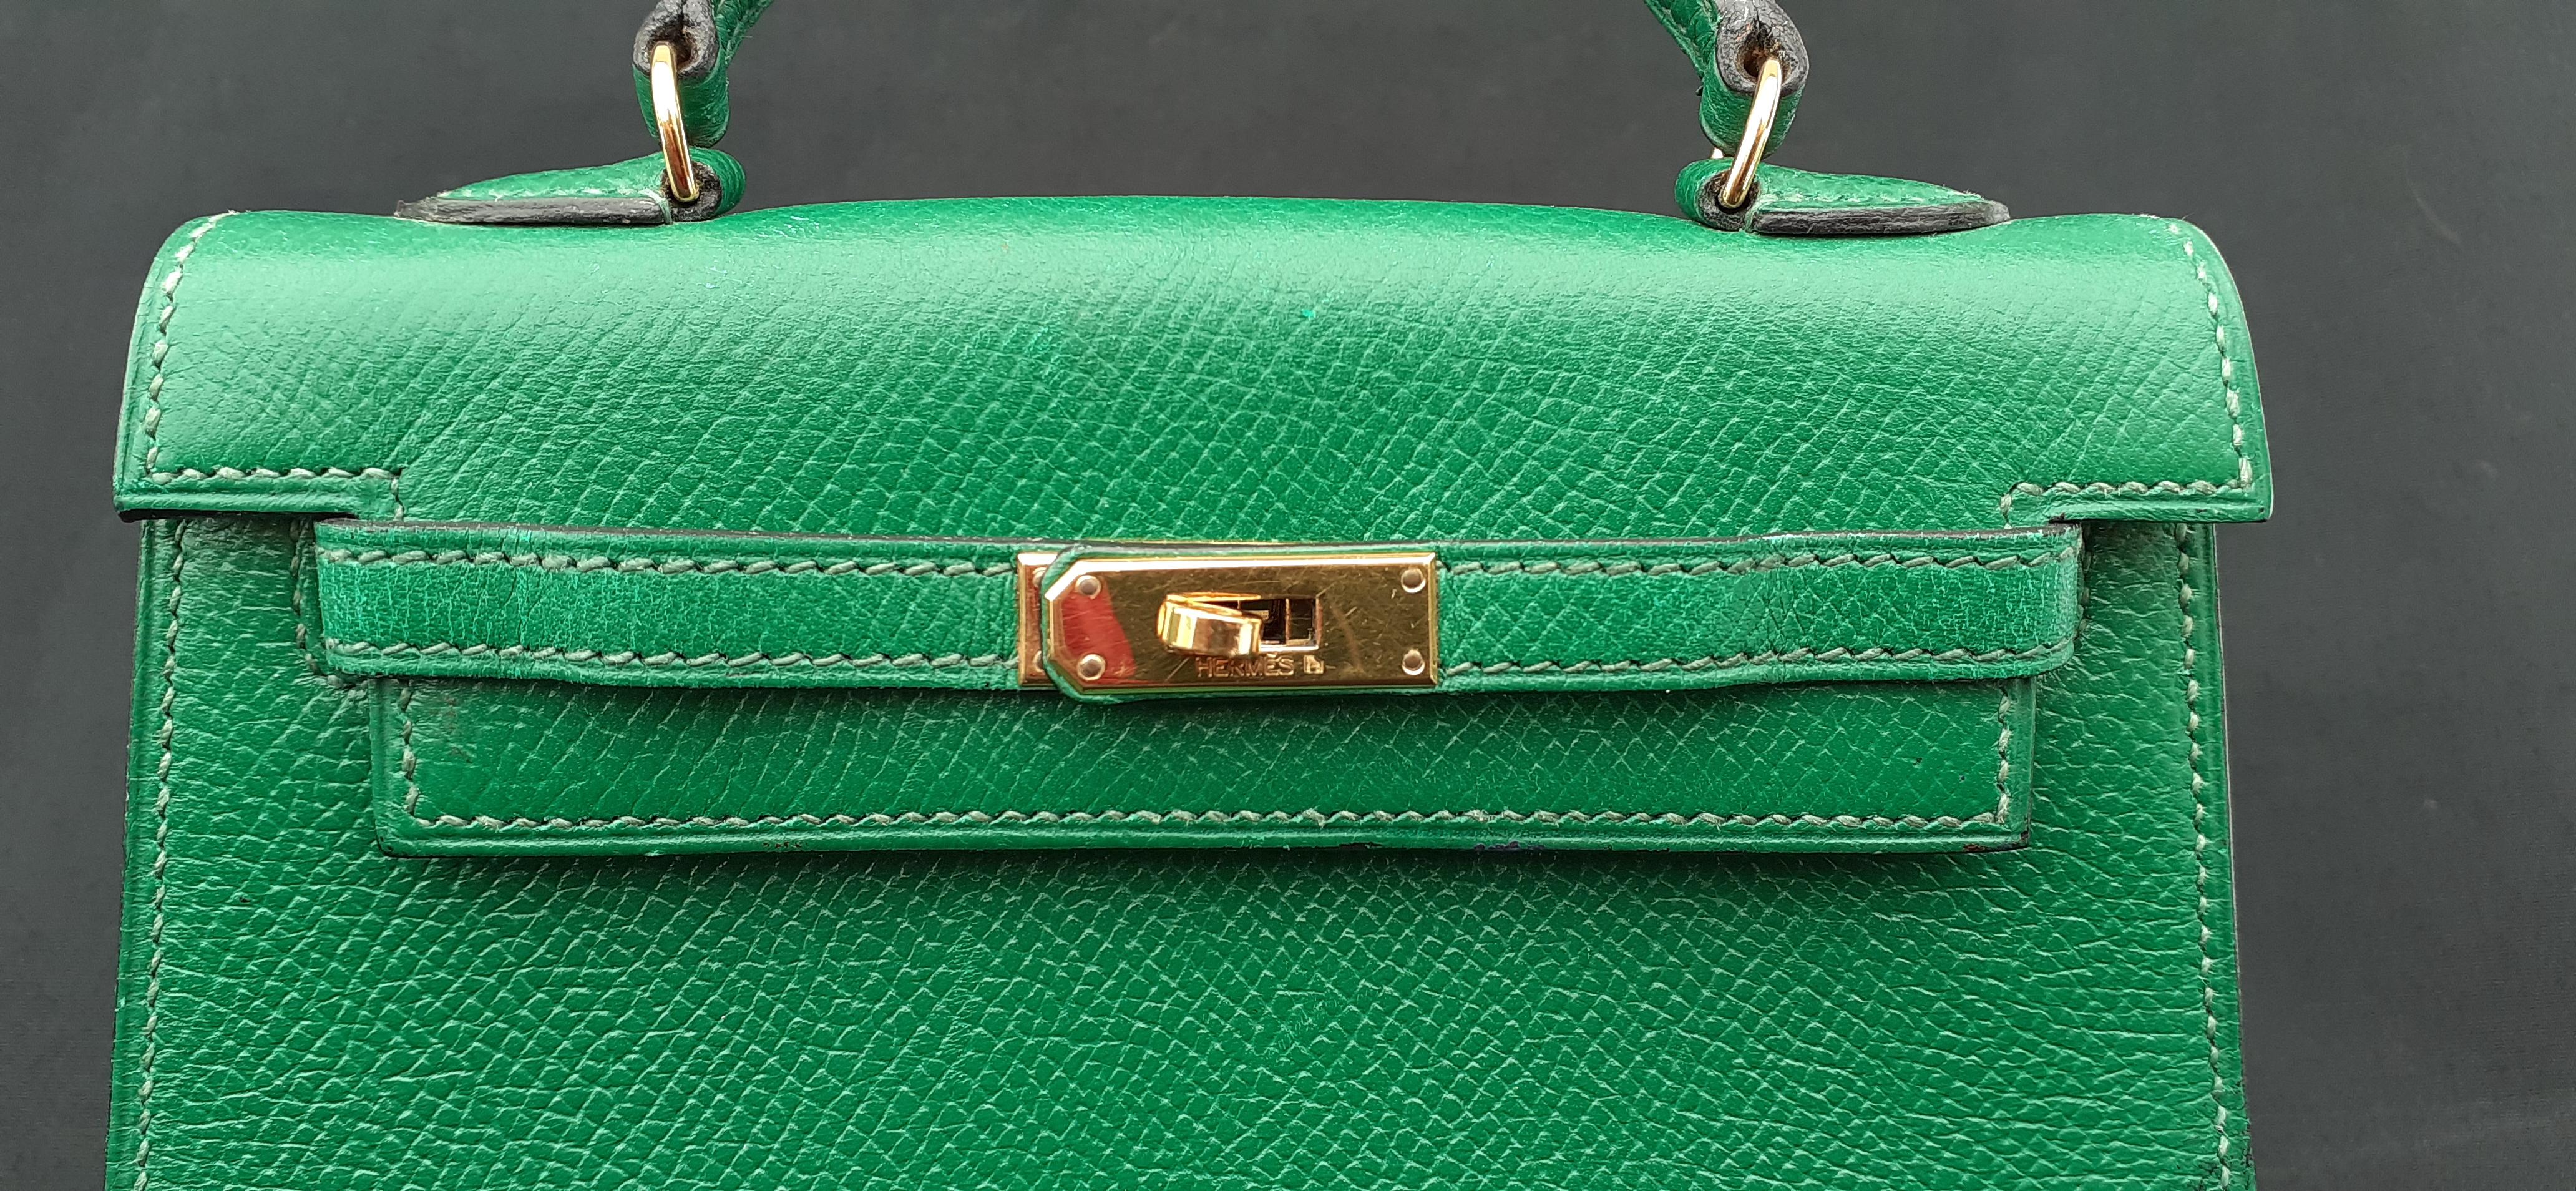 Exceptional Hermès Vintage Micro Kelly 15 cm Sellier Bag Green Leather Gold Hdw 5